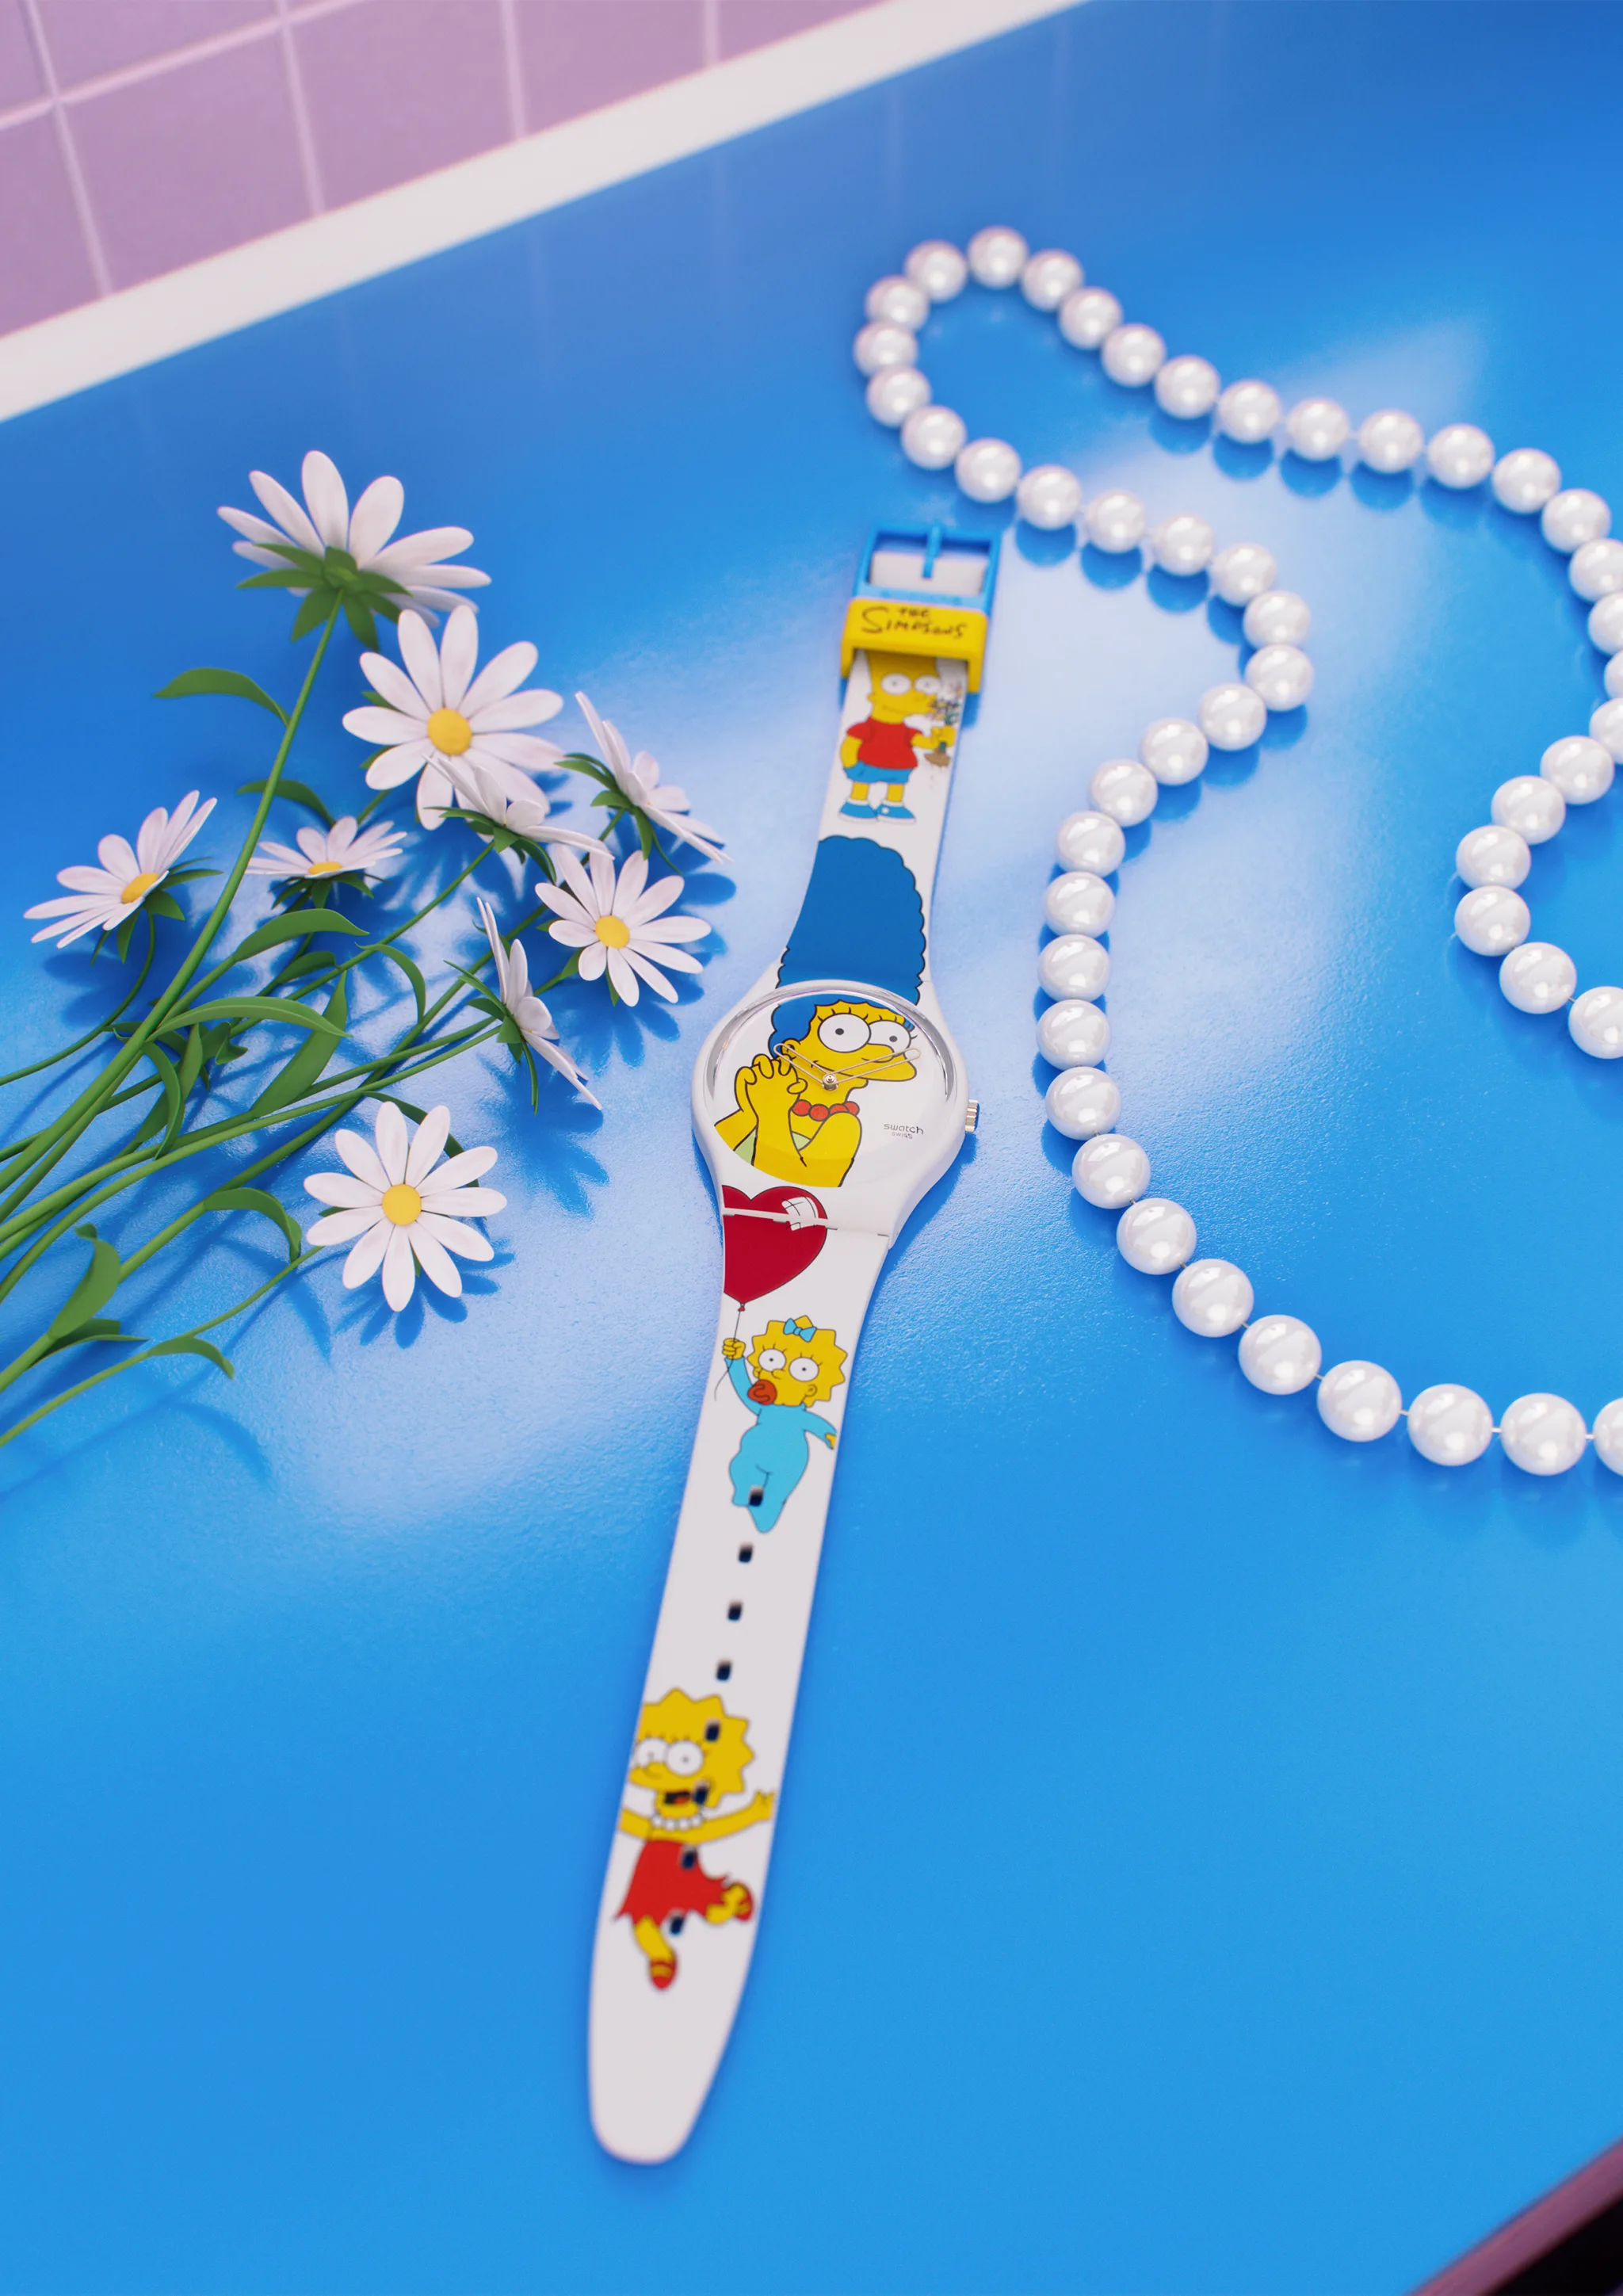 Create long-lasting memories this Mother’s Day and Father’s Day with Swatch and The Simpsons